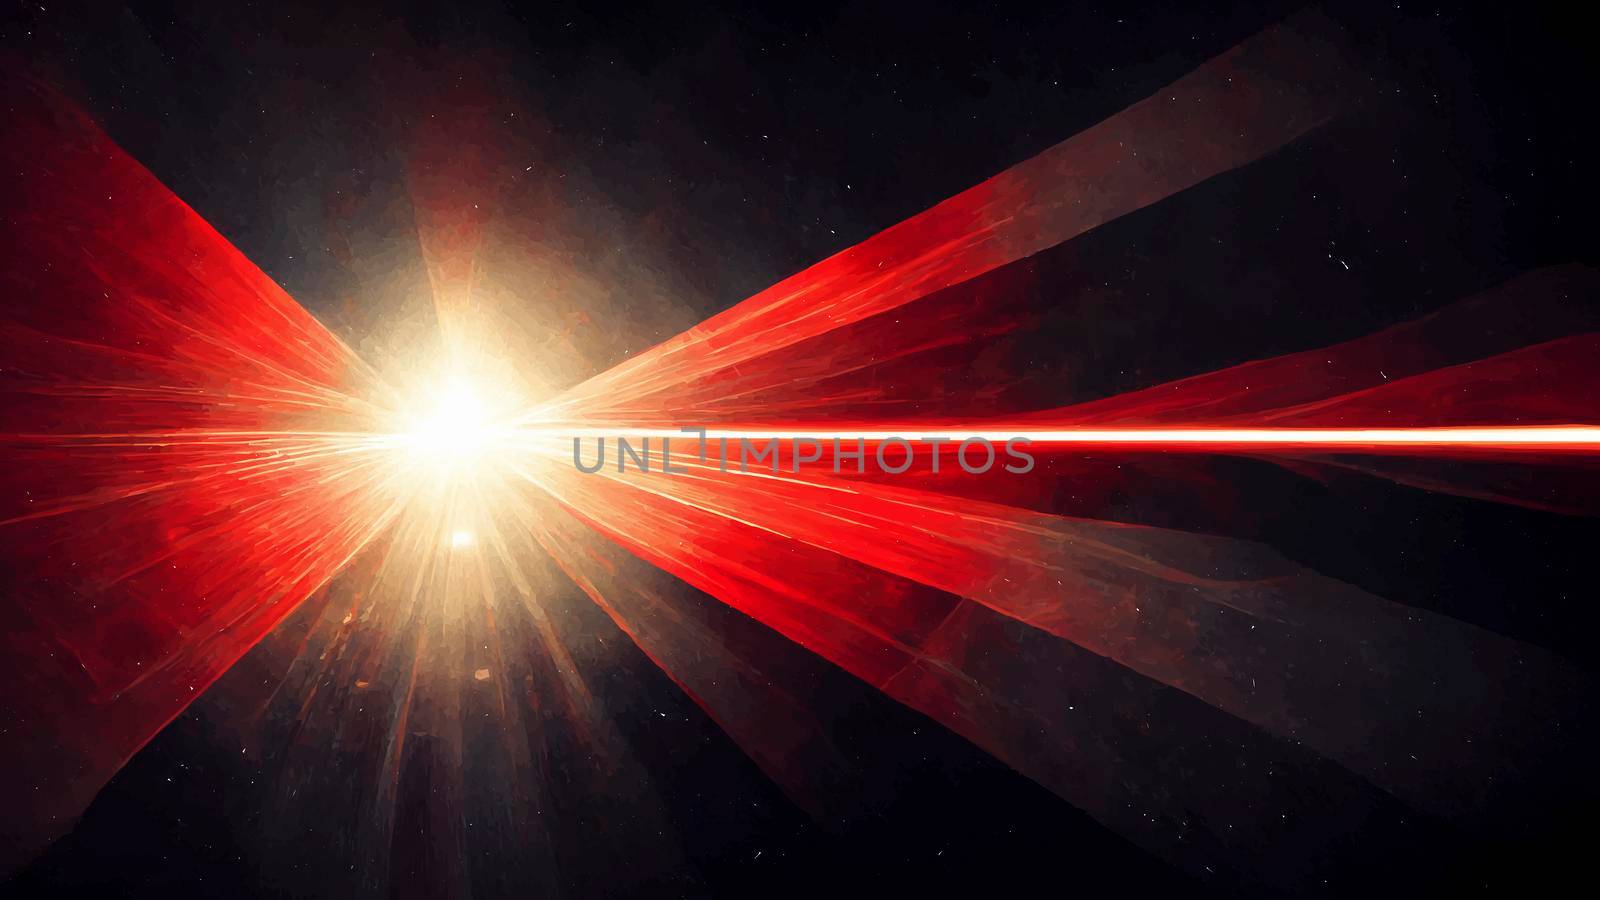 Red Light Lens flare on black background. Light Lens flare on black background. Lens flare with bright light isolated with a black background. Used for textures and materials.